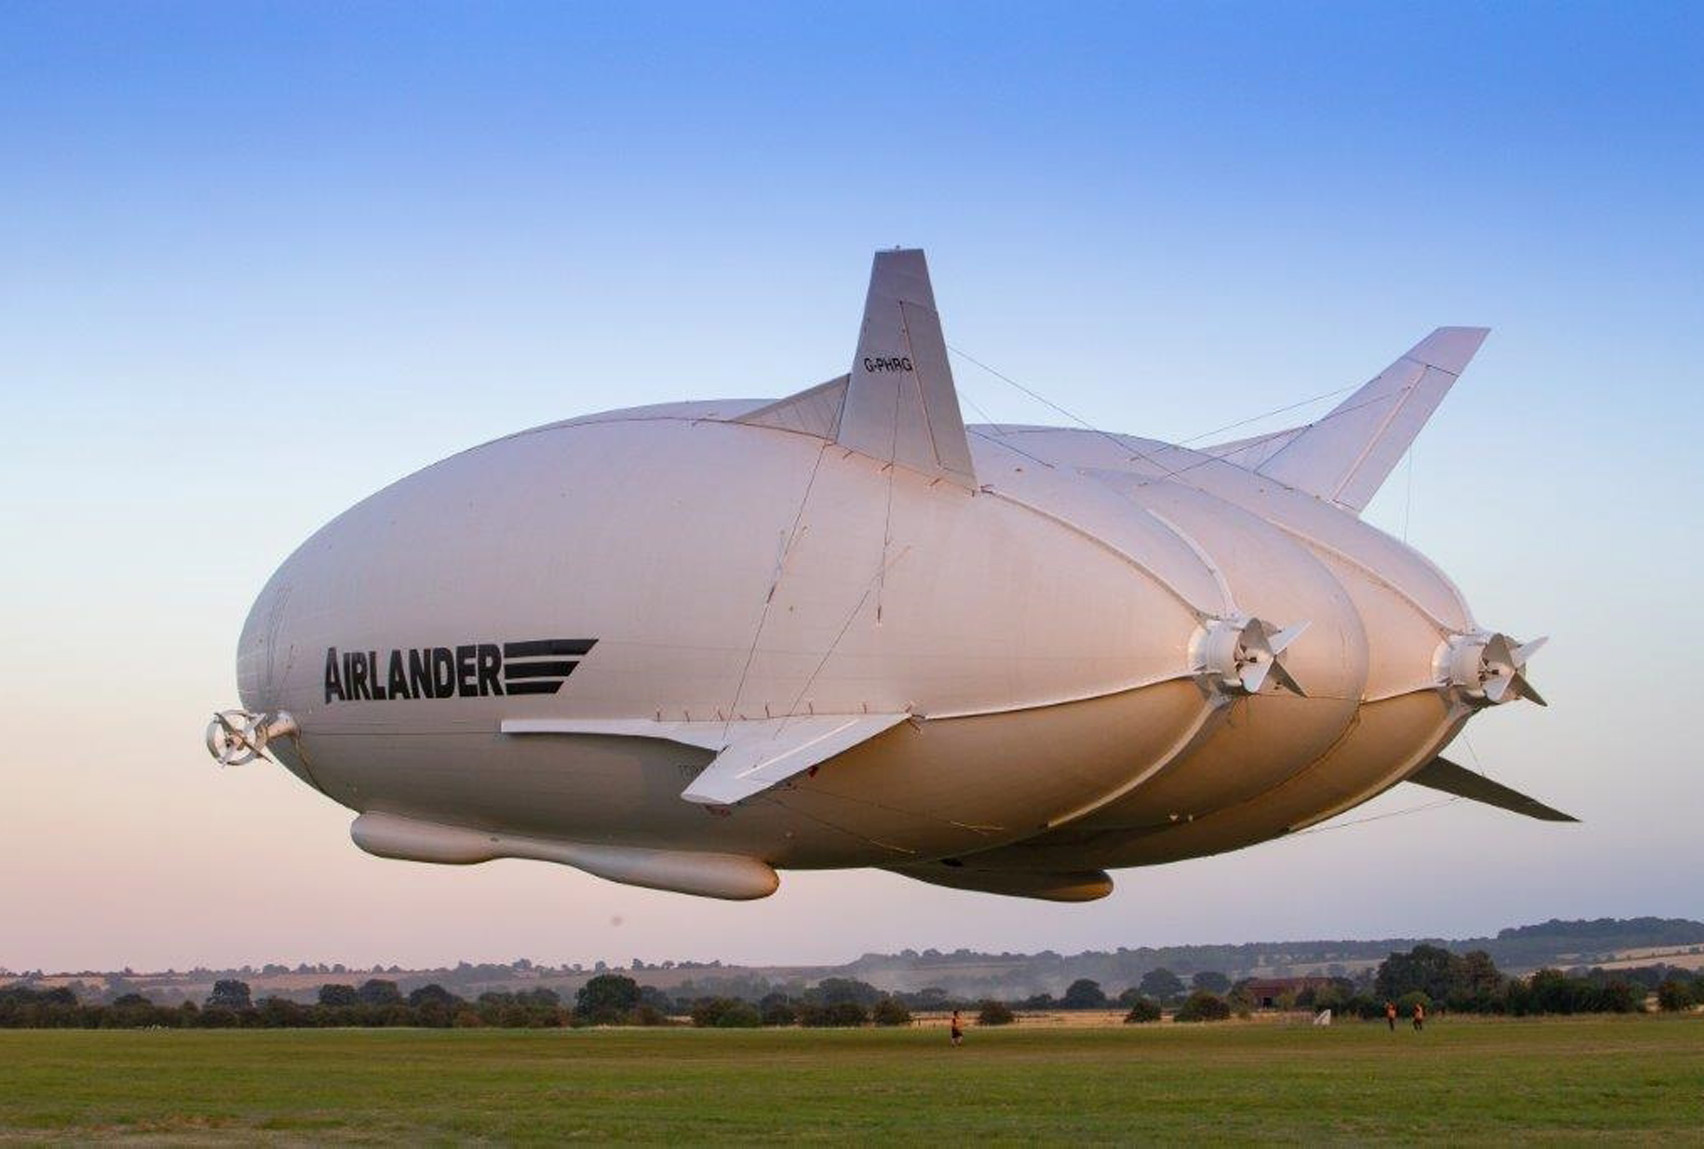 World's biggest aircraft "the Flying Bum" crashes on test flight